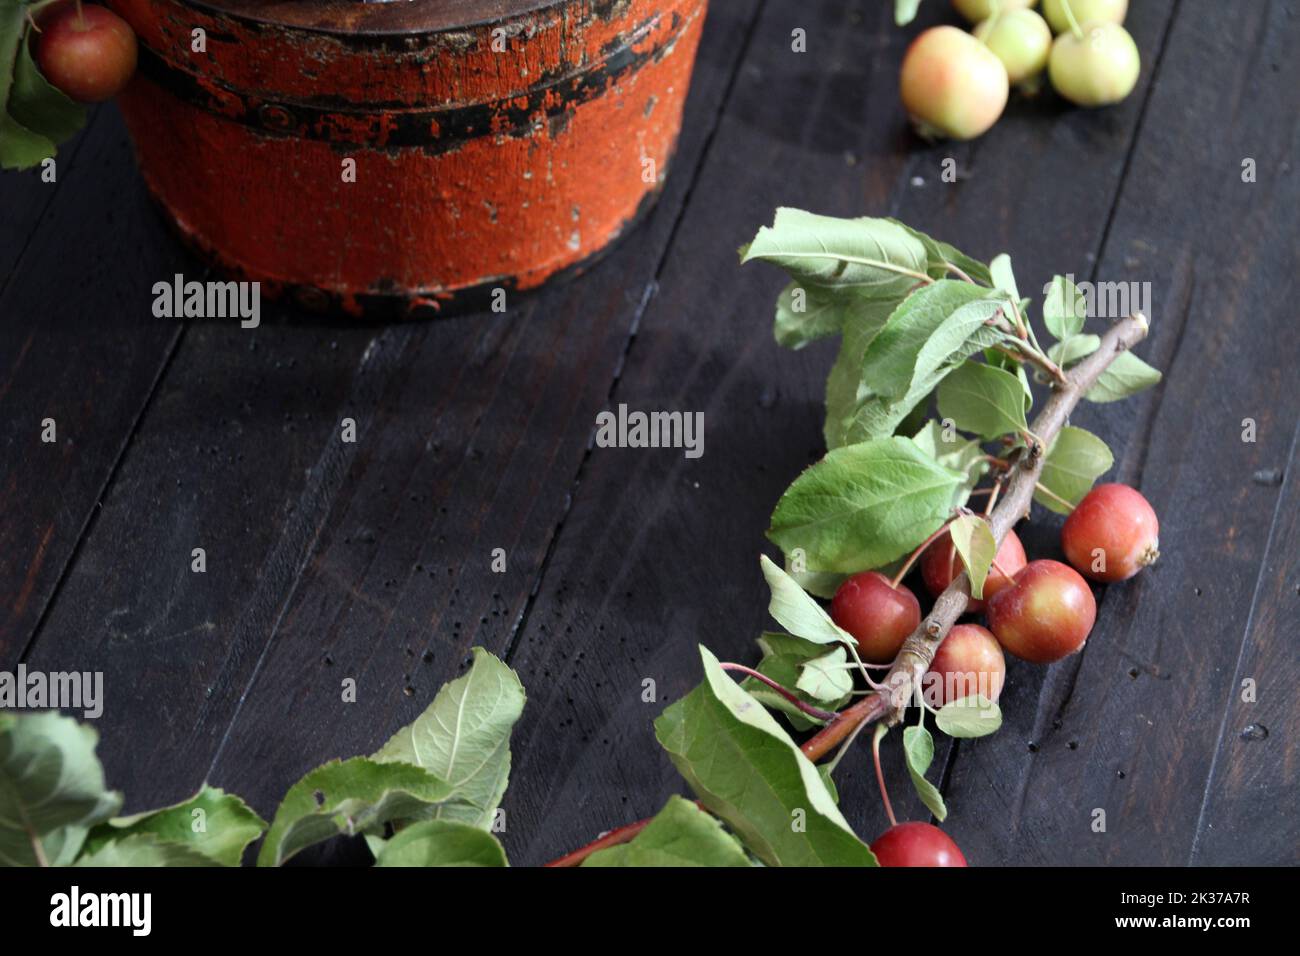 A closeup shot of a branch of Malus prunifolia fruit on a wooden table Stock Photo